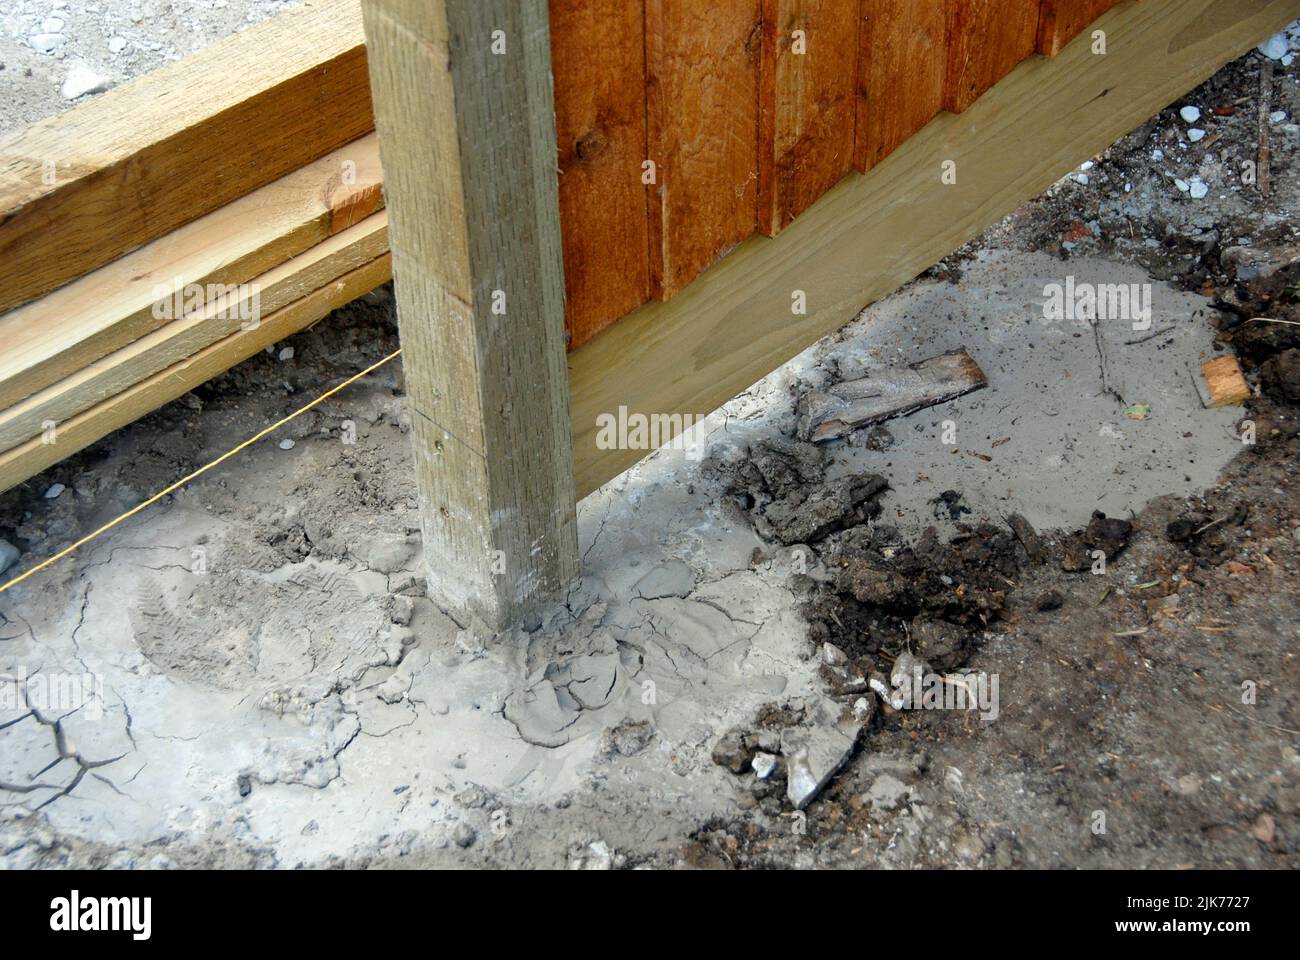 Wooden fence post set in quick-drying cement with fence panel attached and string for guide line visible Stock Photo